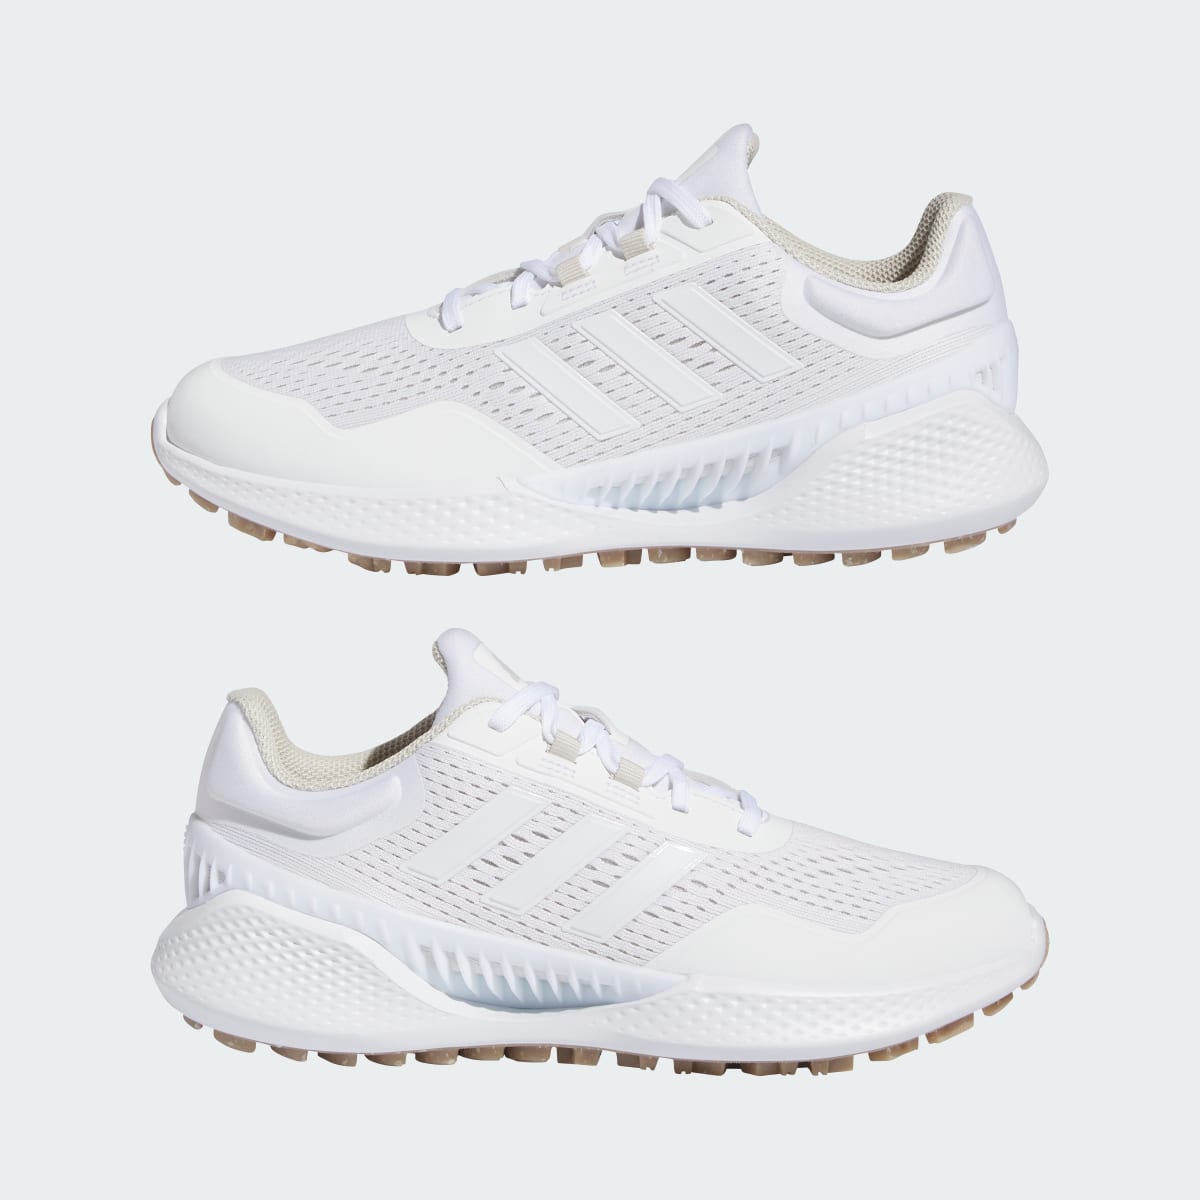 Adidas Summervent 24 Bounce Golf Shoes Low. 8